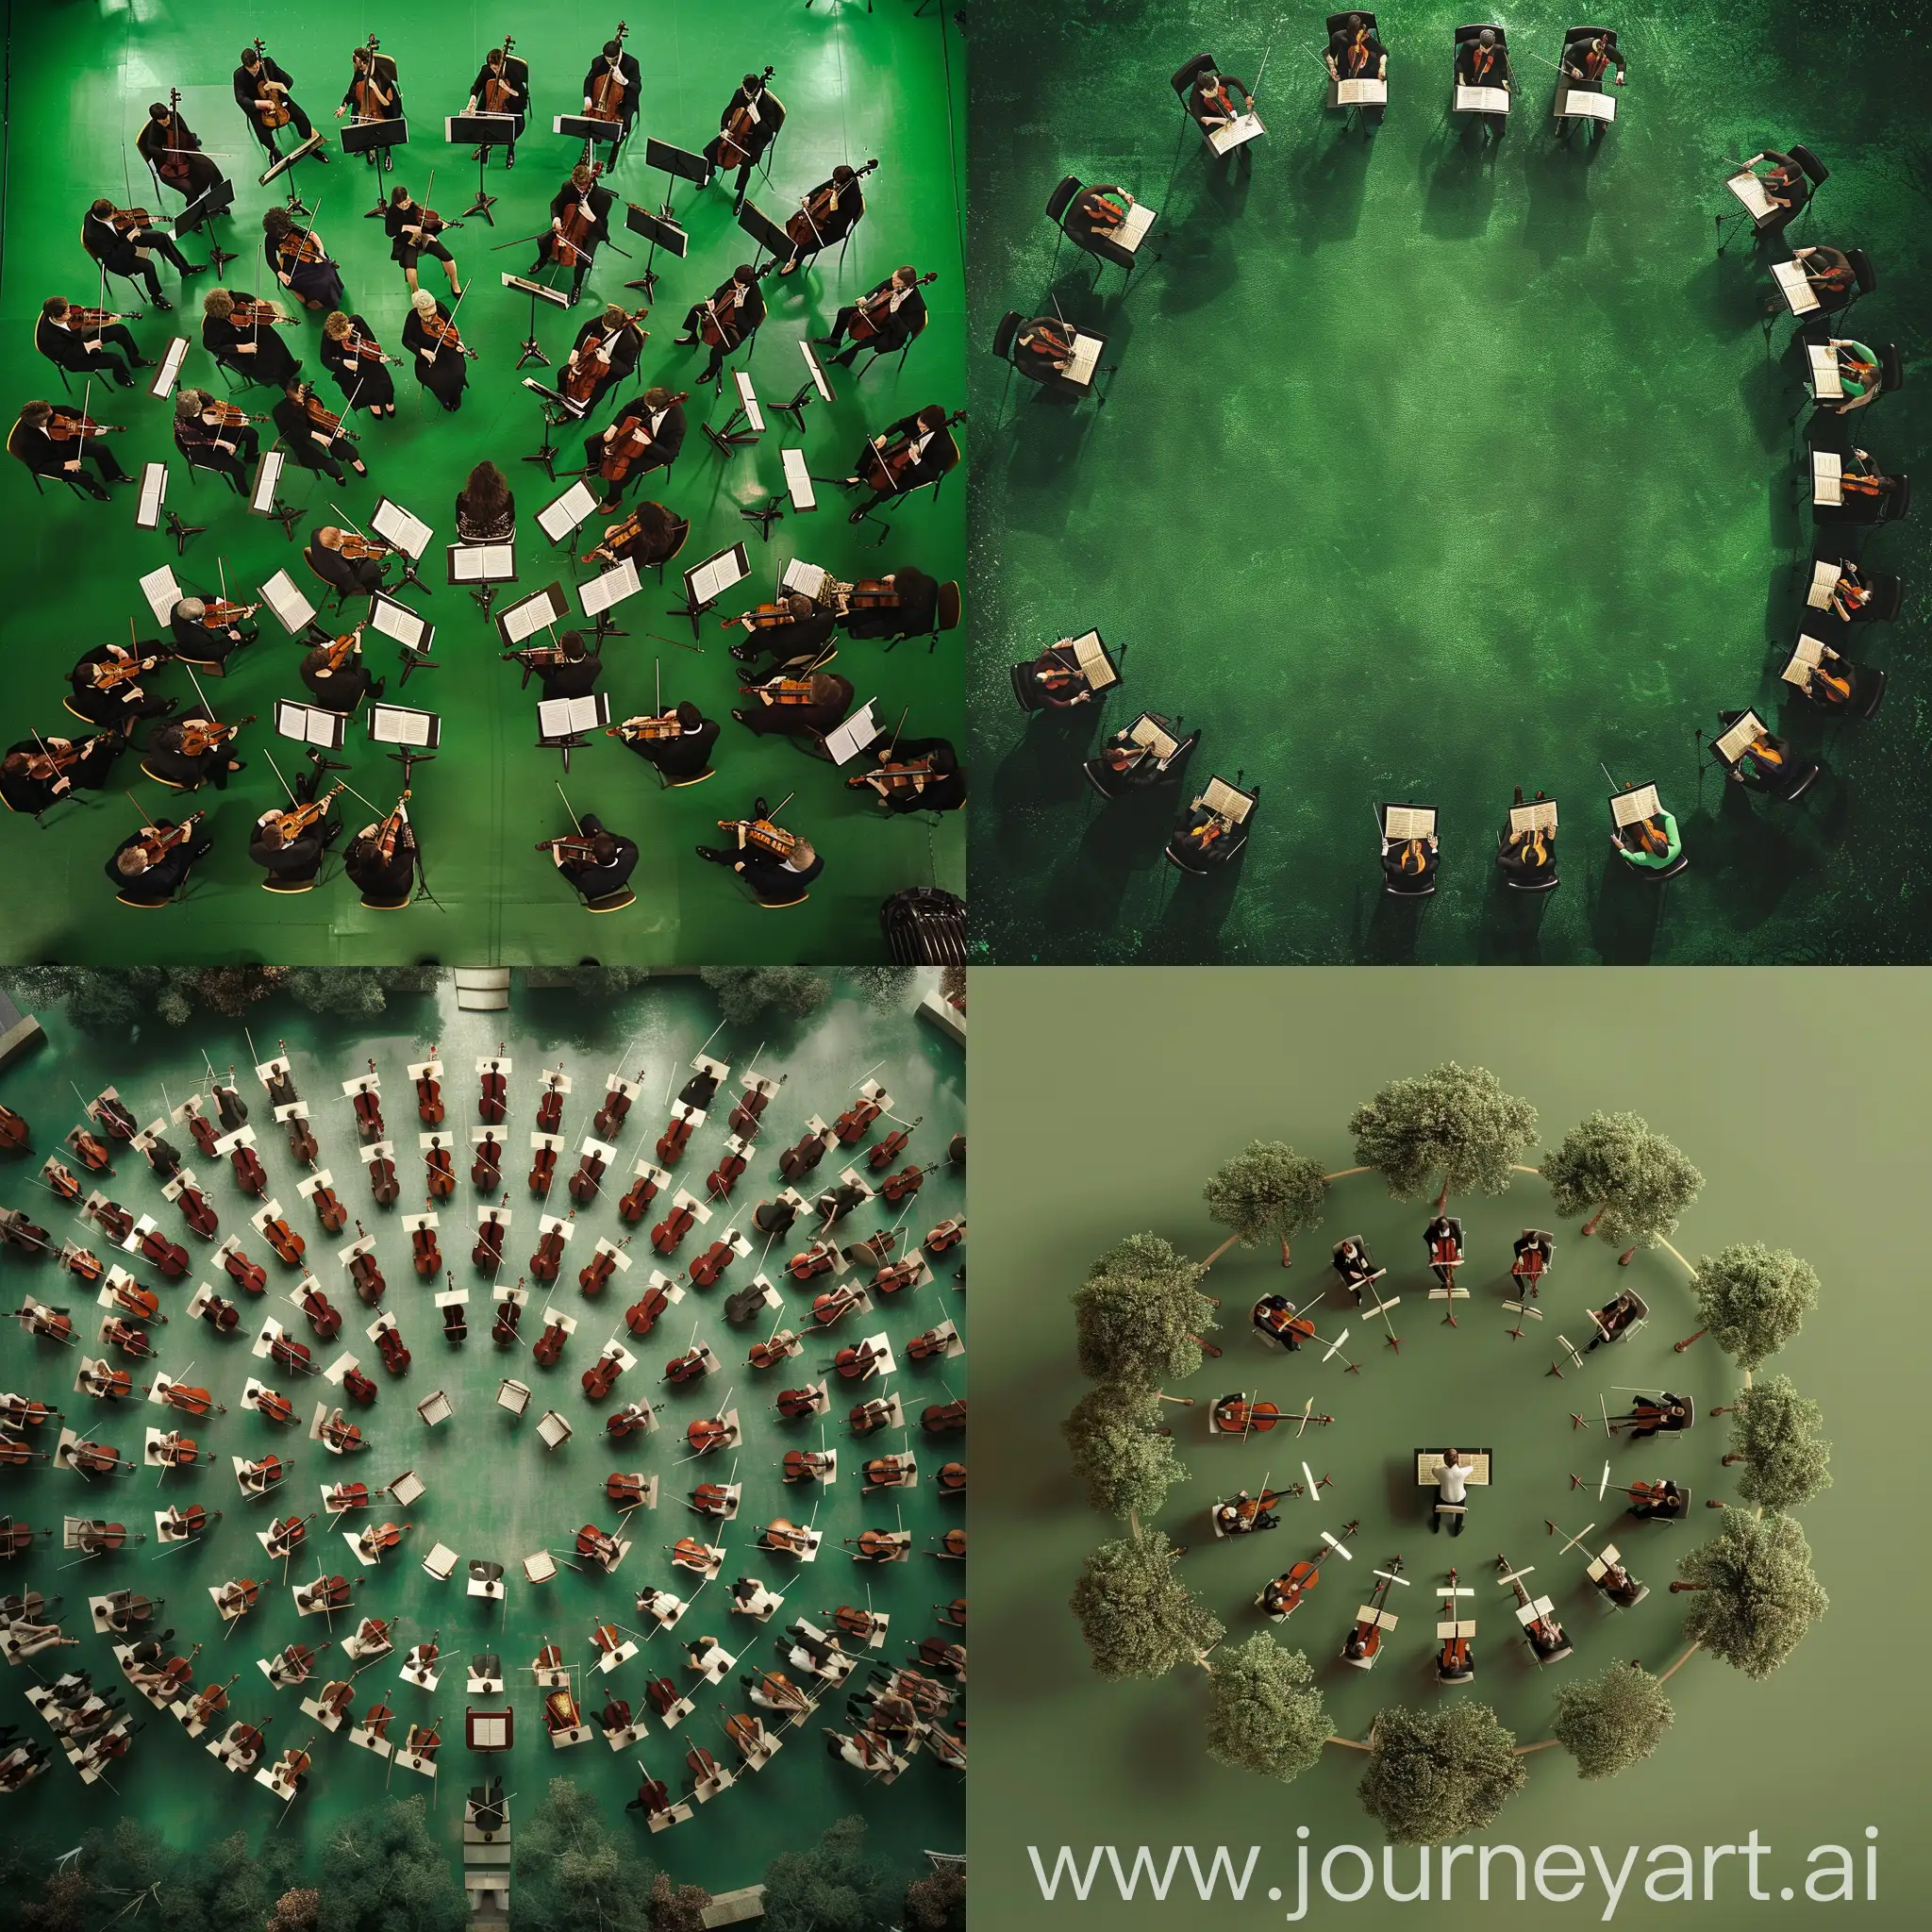 generate an realistic orchestra aerial view with green background